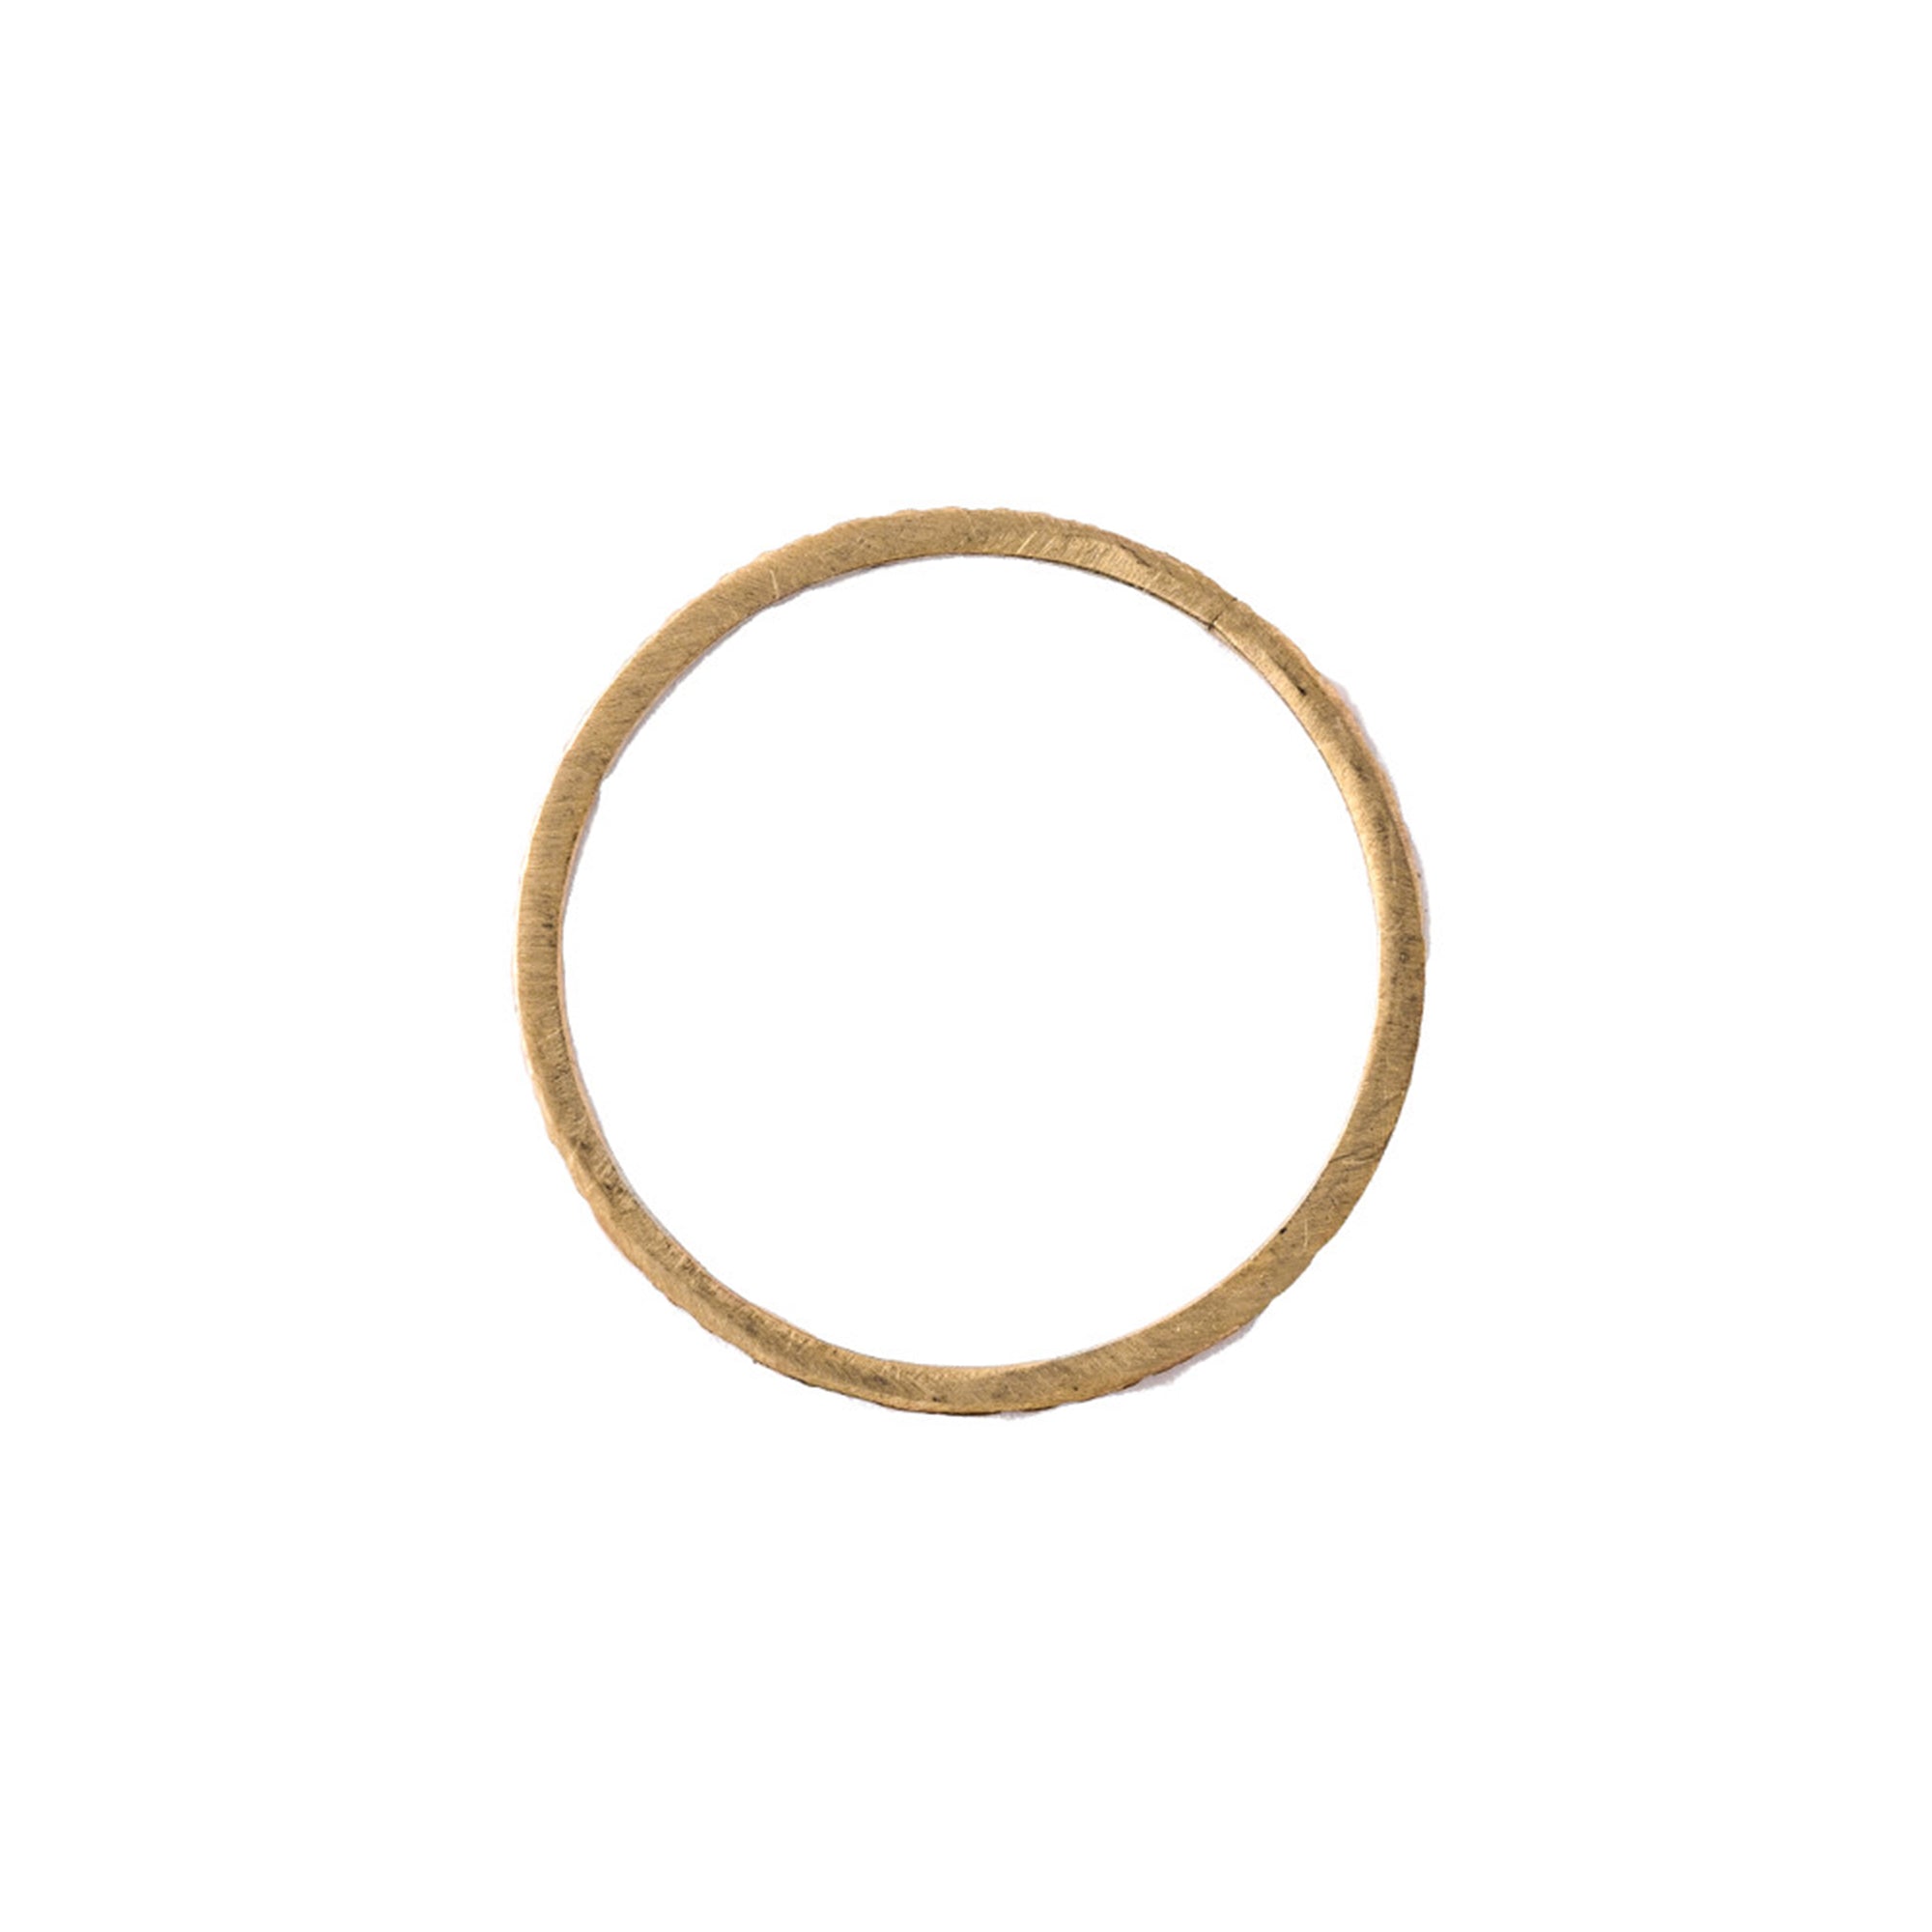 The Lines Band is a simple textured ring made in 14k gold, making it the perfect piece to be stacked or worn on its own.